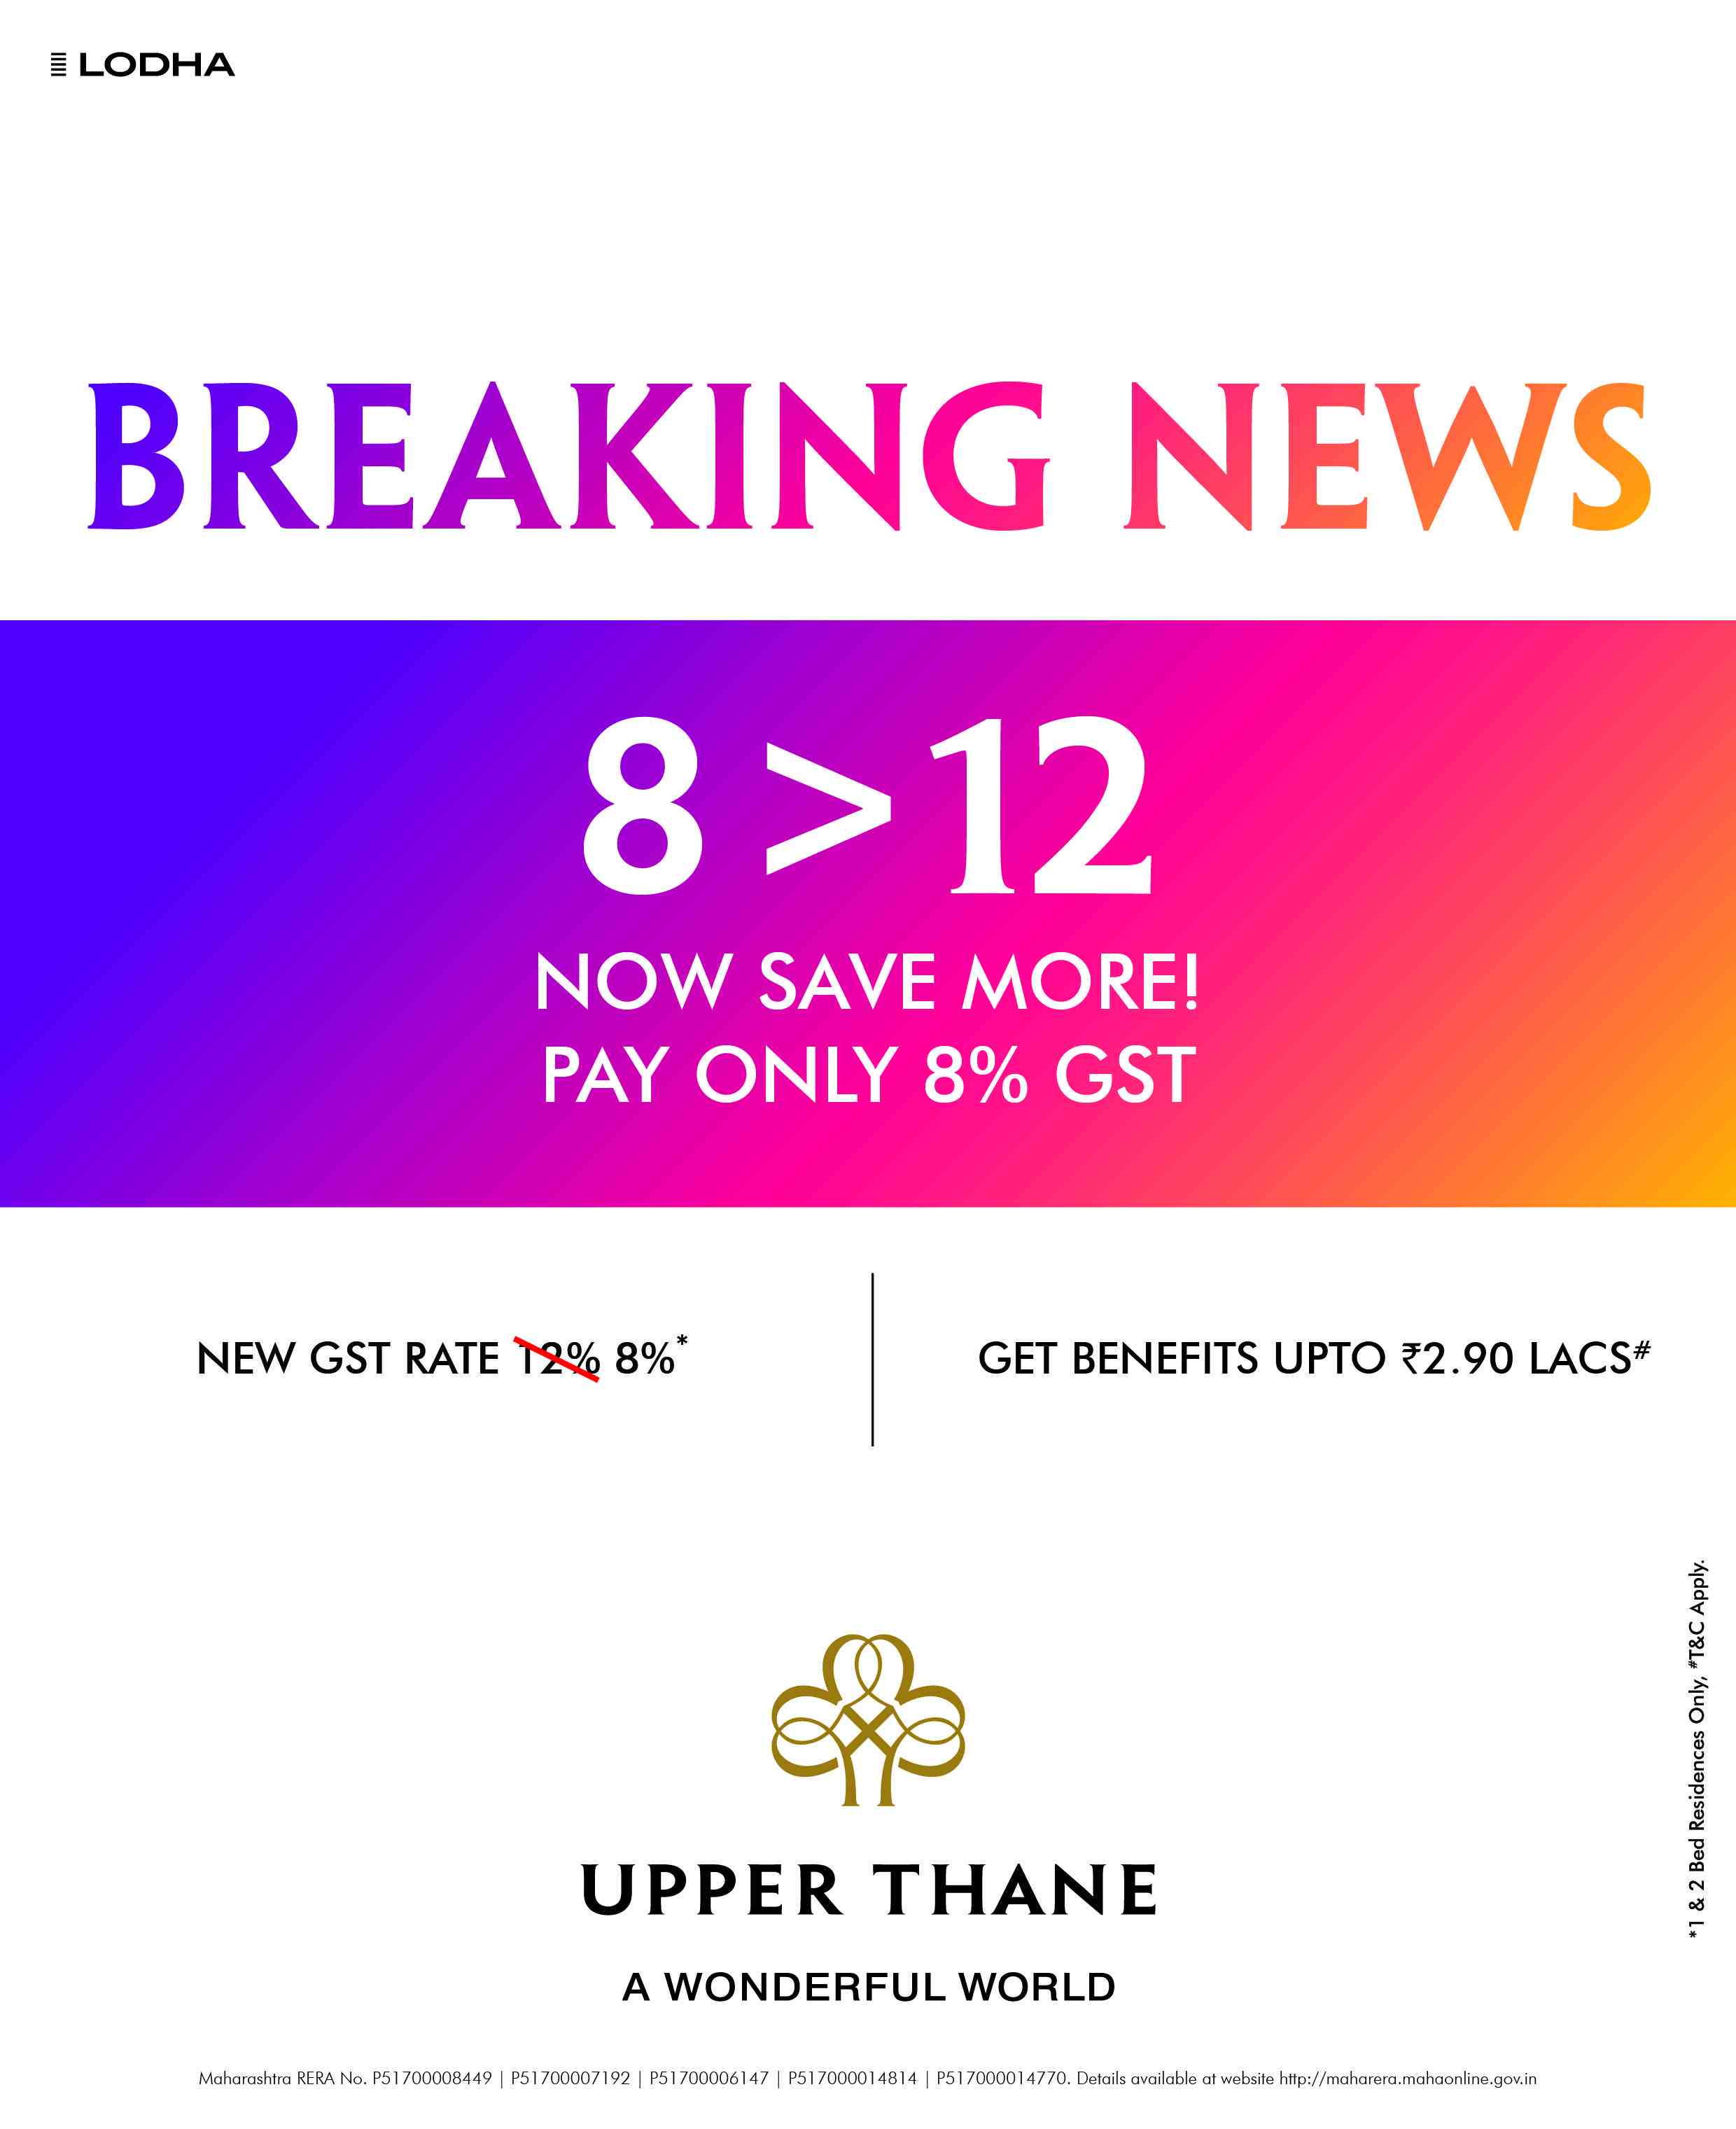 Now pay only 8% GST and save more at Lodha Upper Thane in Mumbai Update